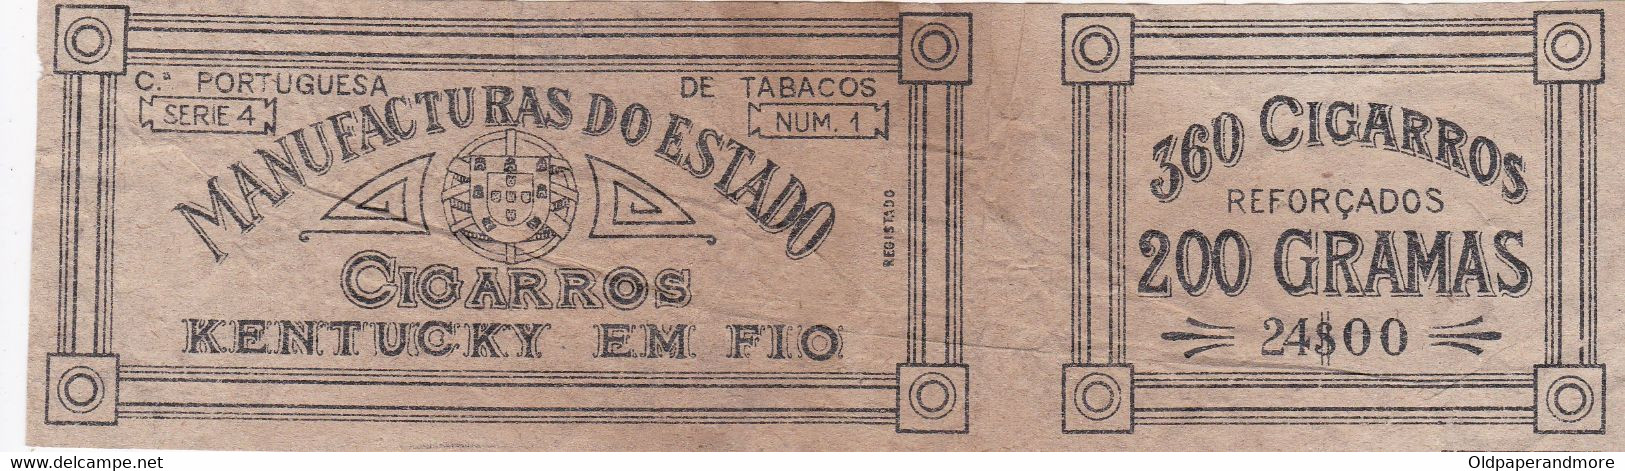 My Box 2 - PORTUGAL - LABEL - CIGARROS KENTUCKY - OLD CIGAR LABEL - TOBACCO LABEL - Labels